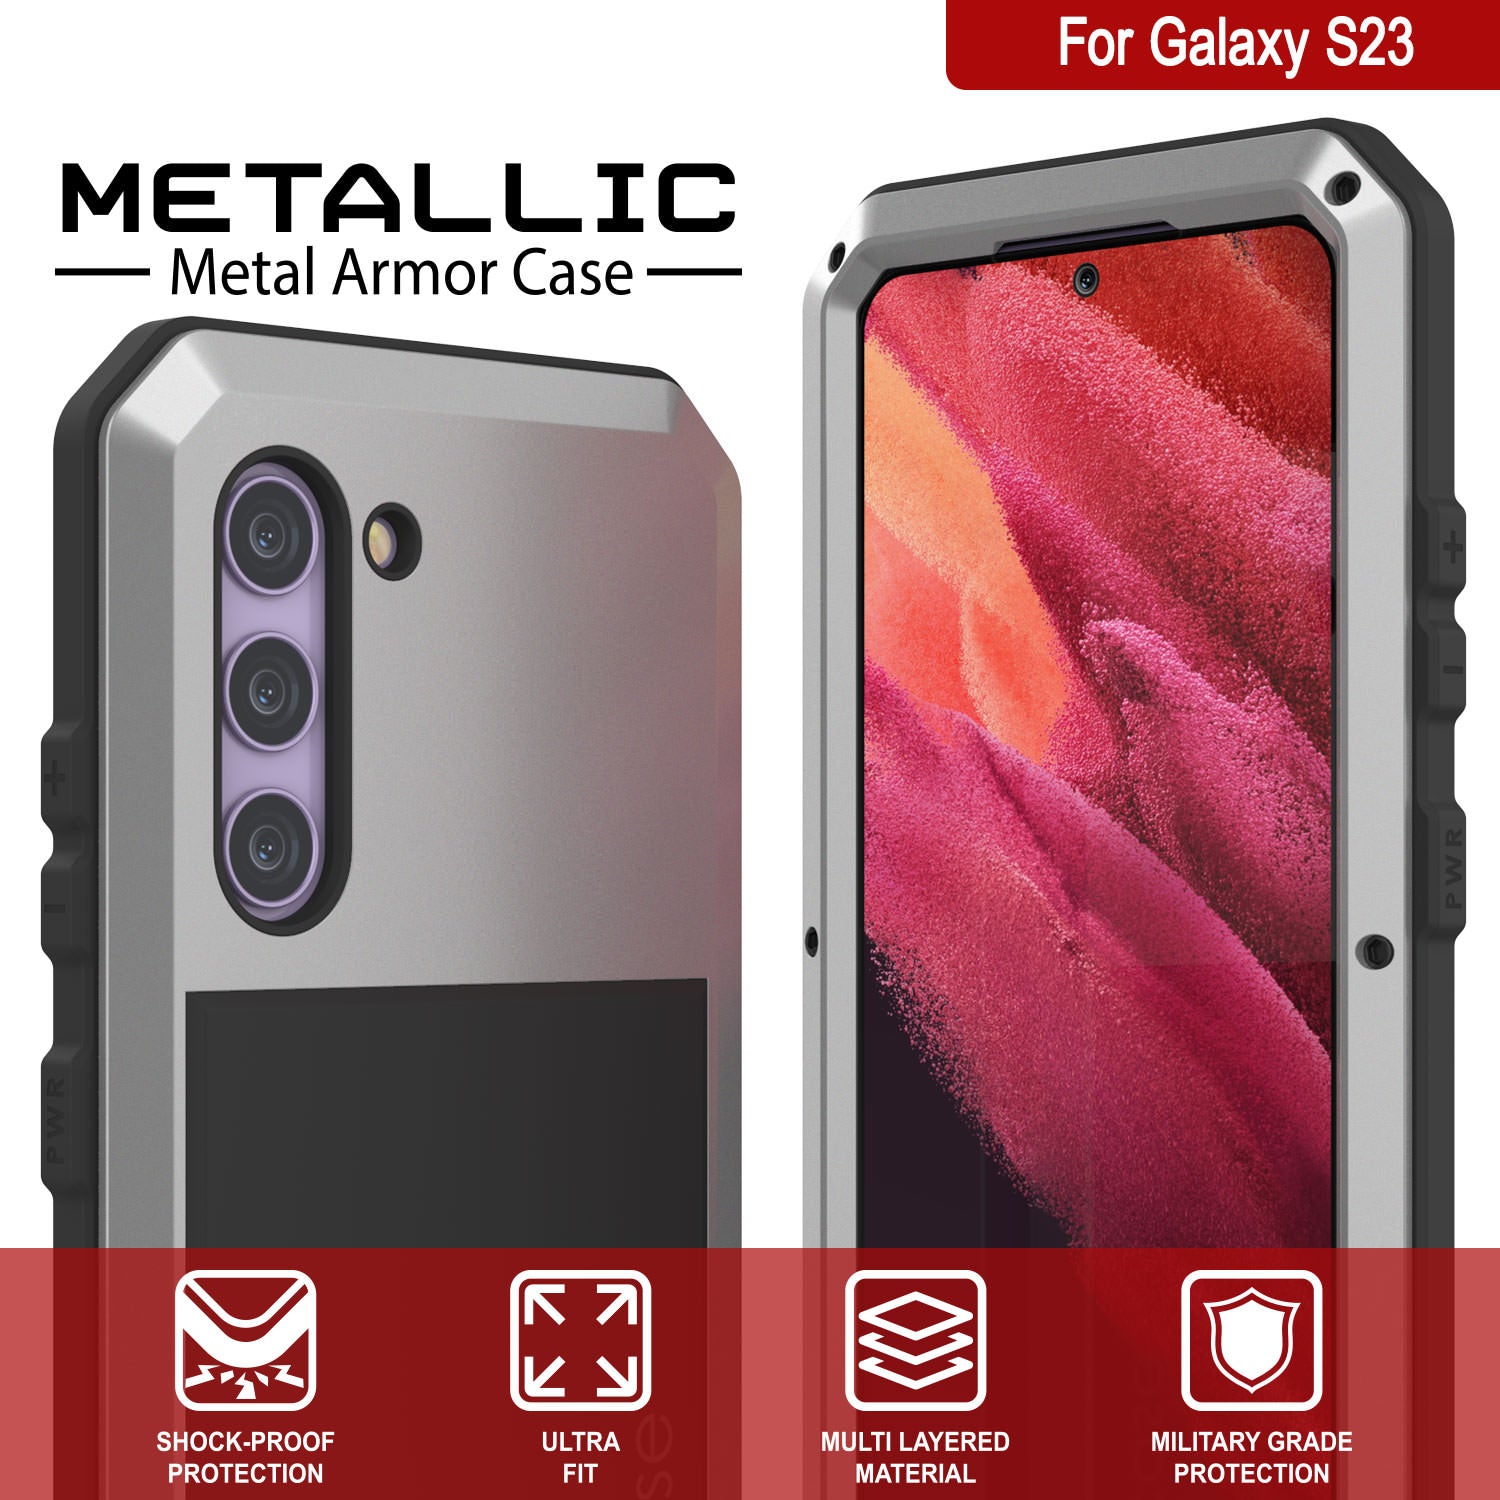 Punkcase Galaxy S23 Metal Case, Heavy Duty Military Grade Armor Cover [Shock Proof] Full Body Hard [Silver]